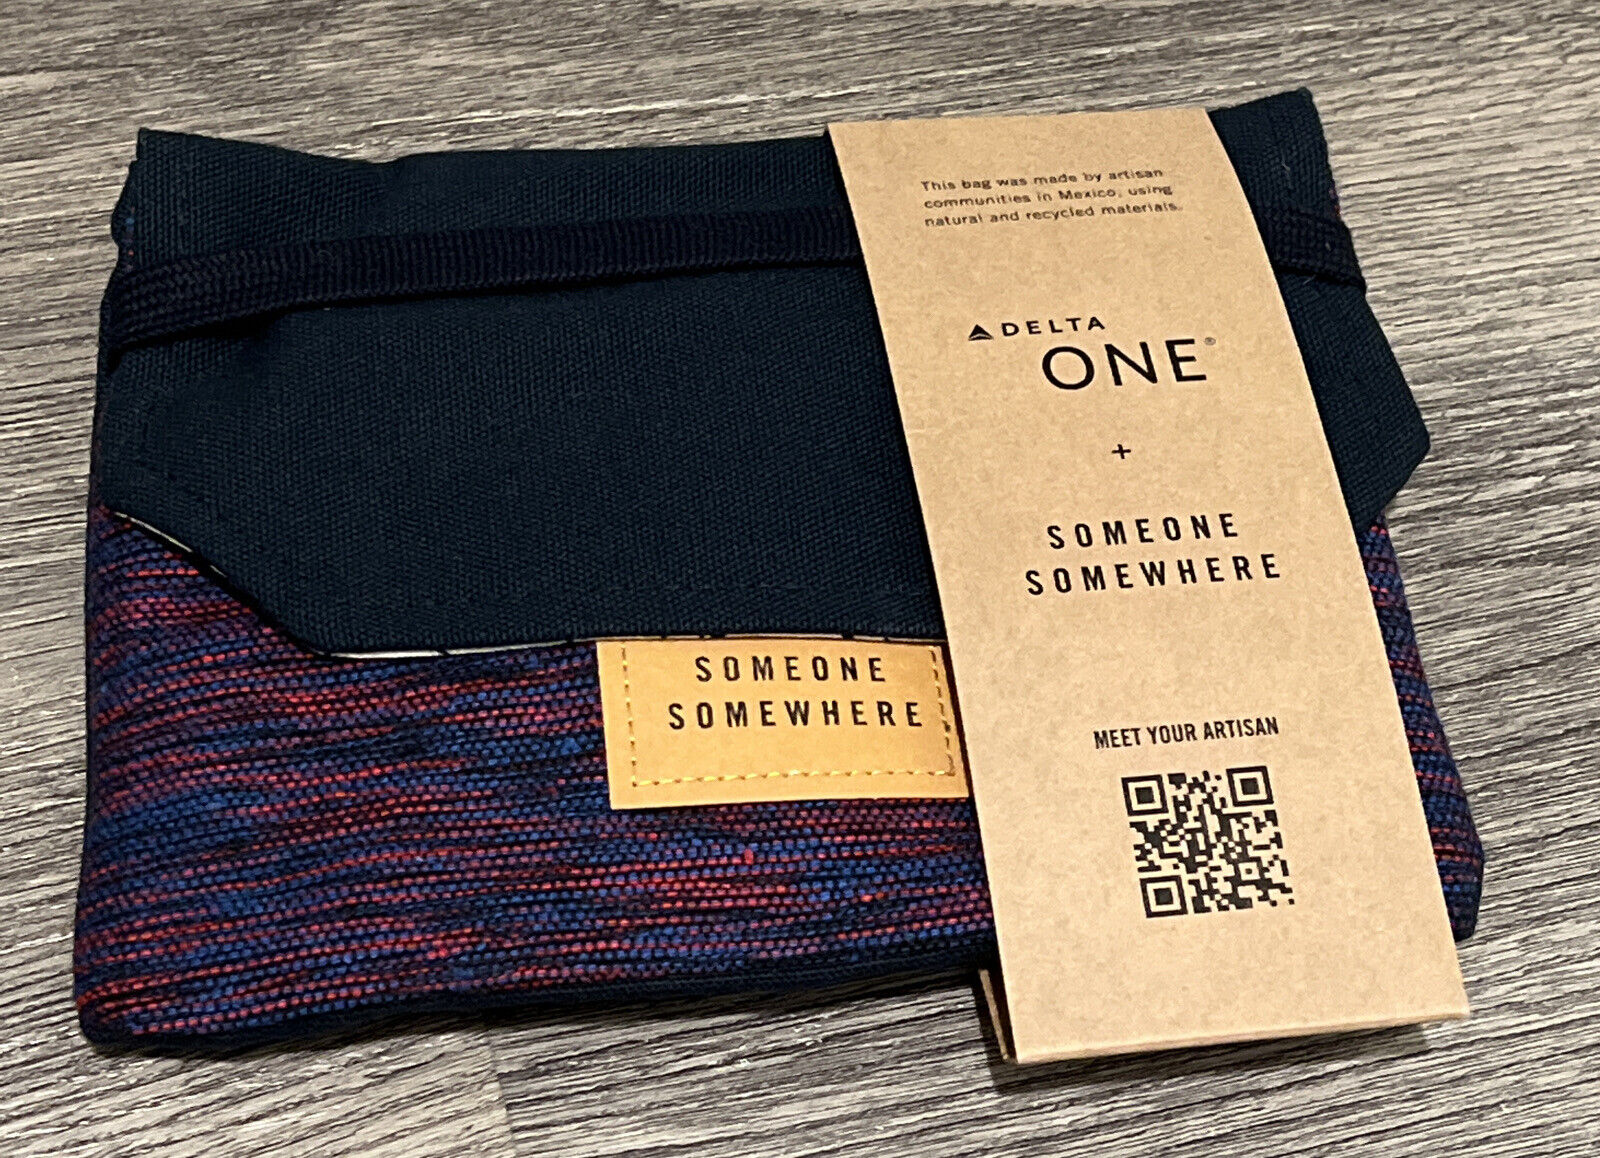 Delta Air Lines - Delta One Amenity Kit (Purple) - Someone Somewhere